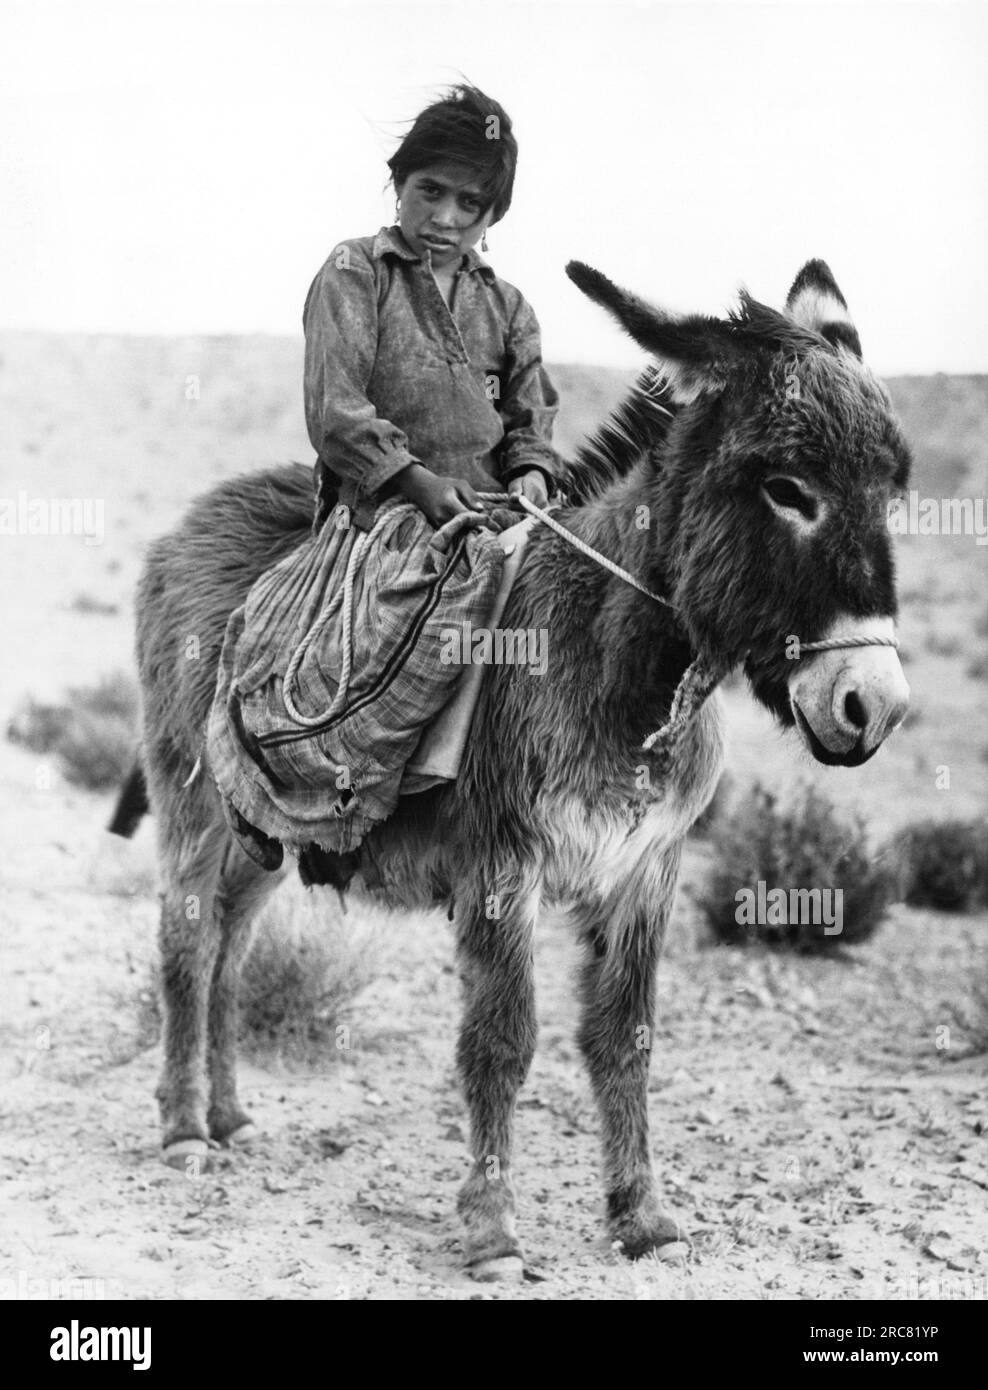 Painted Desert, Arizona:  June 5, 1935 This young Navajo girl is tending her family's flock of sheep and goats that are out grazing in the scarce vegetation. Stock Photo